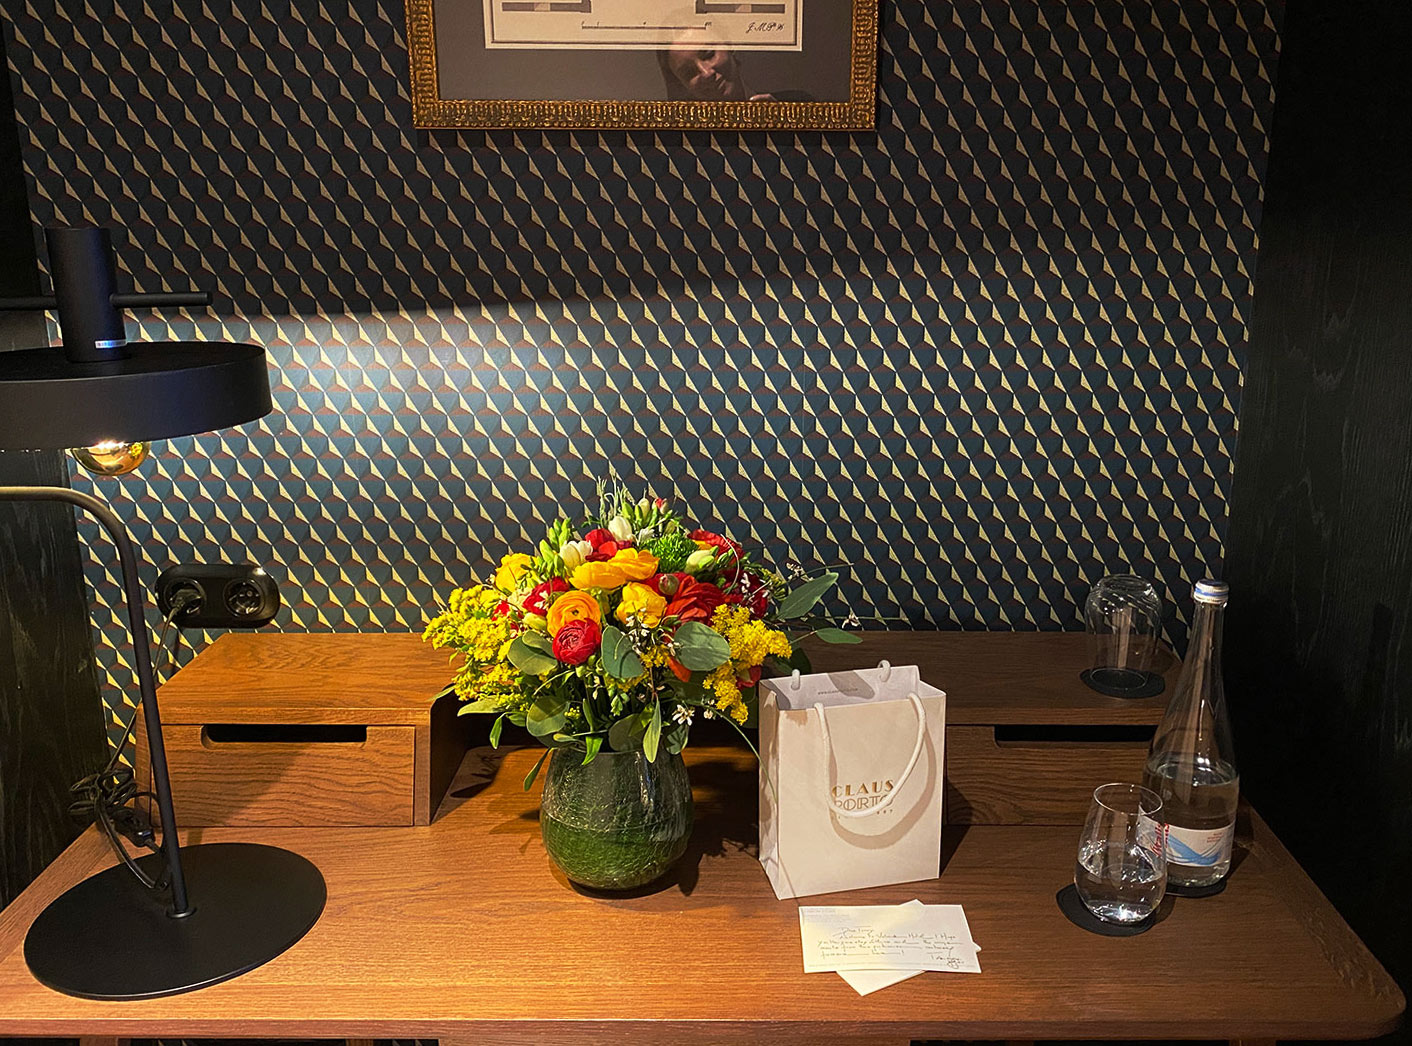 Valverde Hotel Chic welcome to my chic room: fresh flowers and Claus Porto toiletries